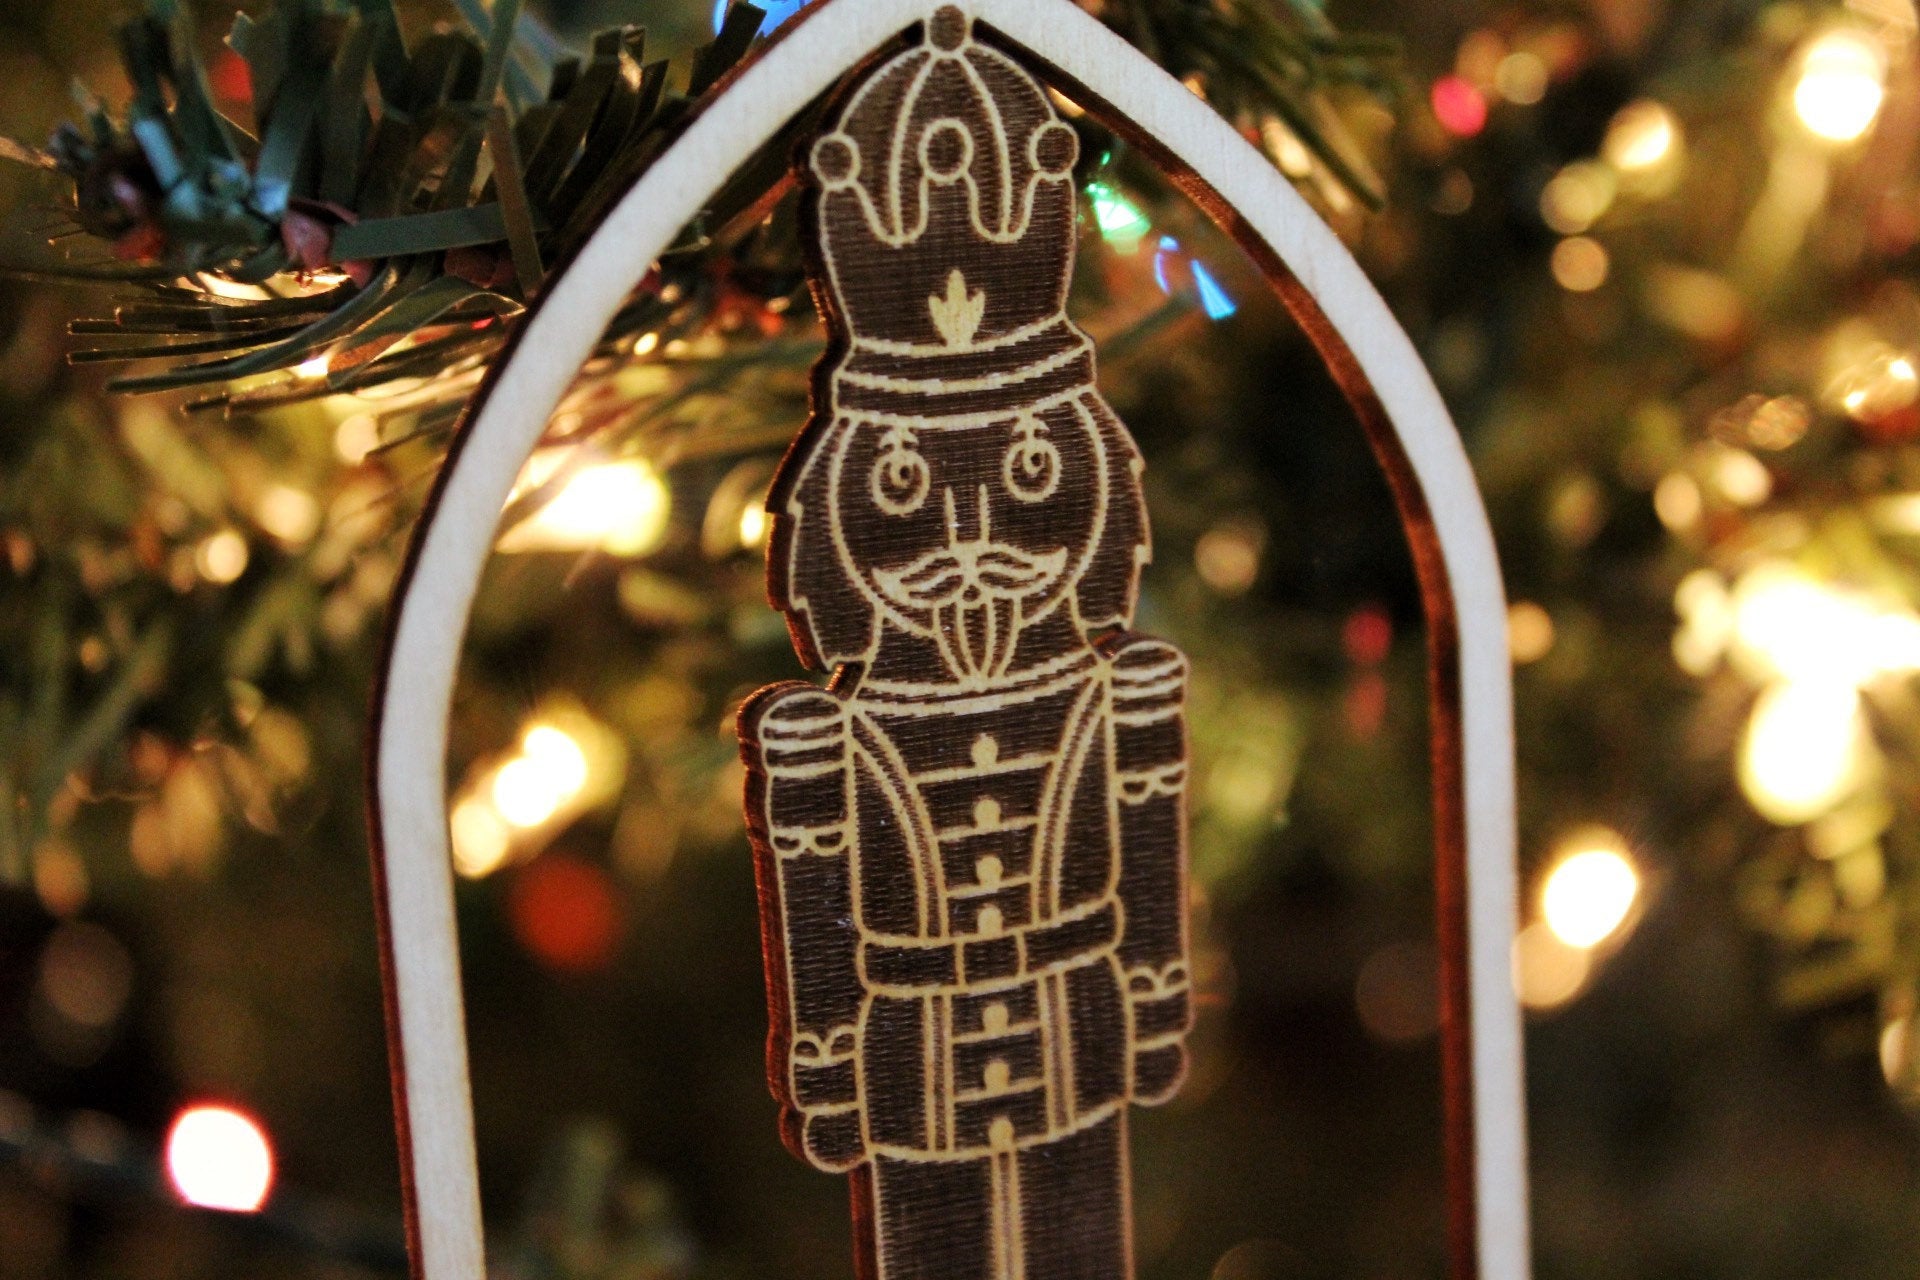 NutCracker Wooden Christmas Ornament Gift, Nutcrackers Toy Soldier Ornament Gift For Her